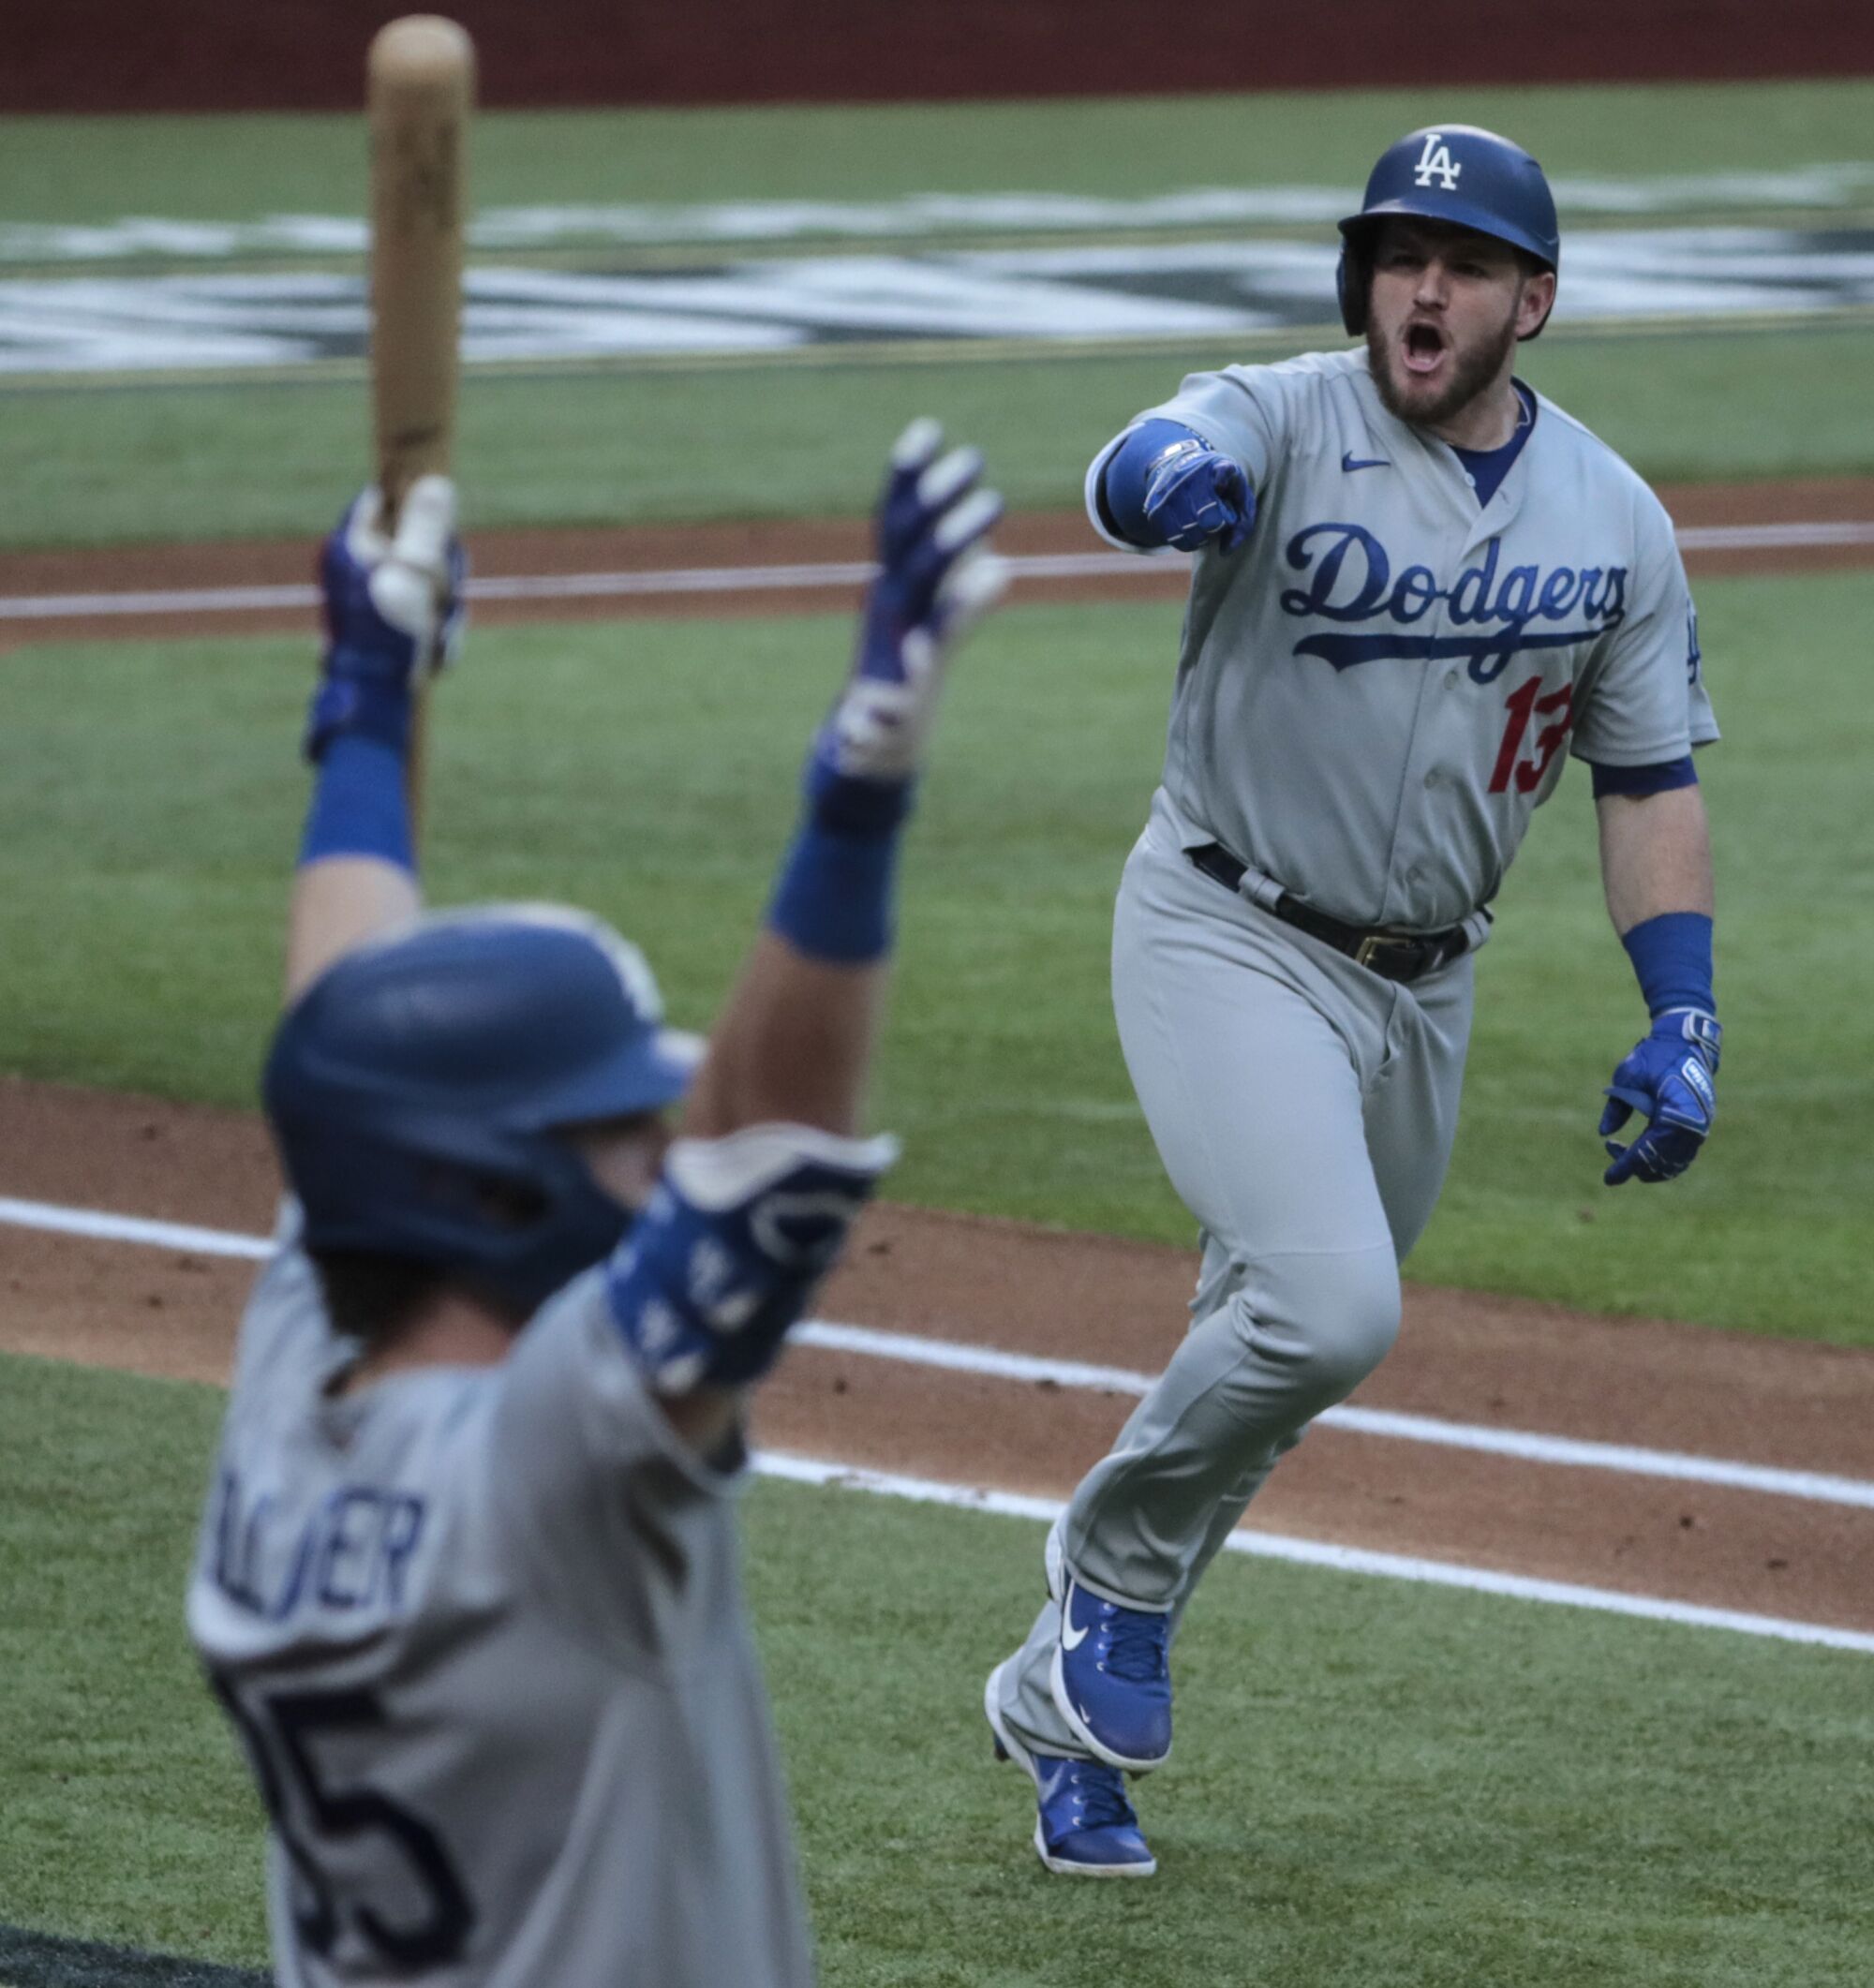 Dodgers first baseman Max Muncy celebrates after hitting a grand slam in the first inning of Game 3 of the NLCS.